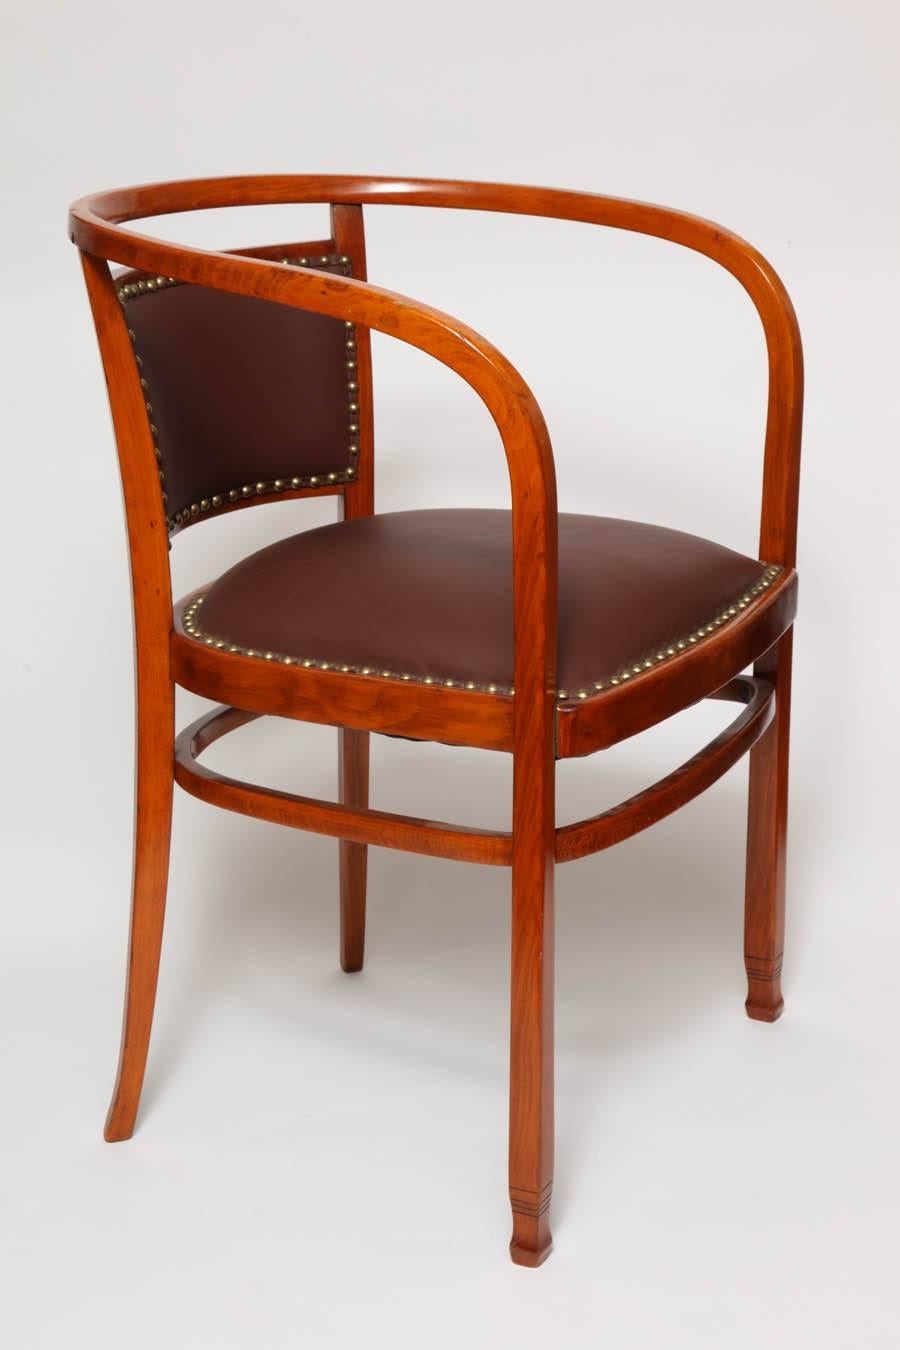 A Viennese secessionist bentwood, beech, brass and leather armchair designed by Otto Wagner, Austria, 1906.
The chair has been reupholstered in leather. Mint condition.